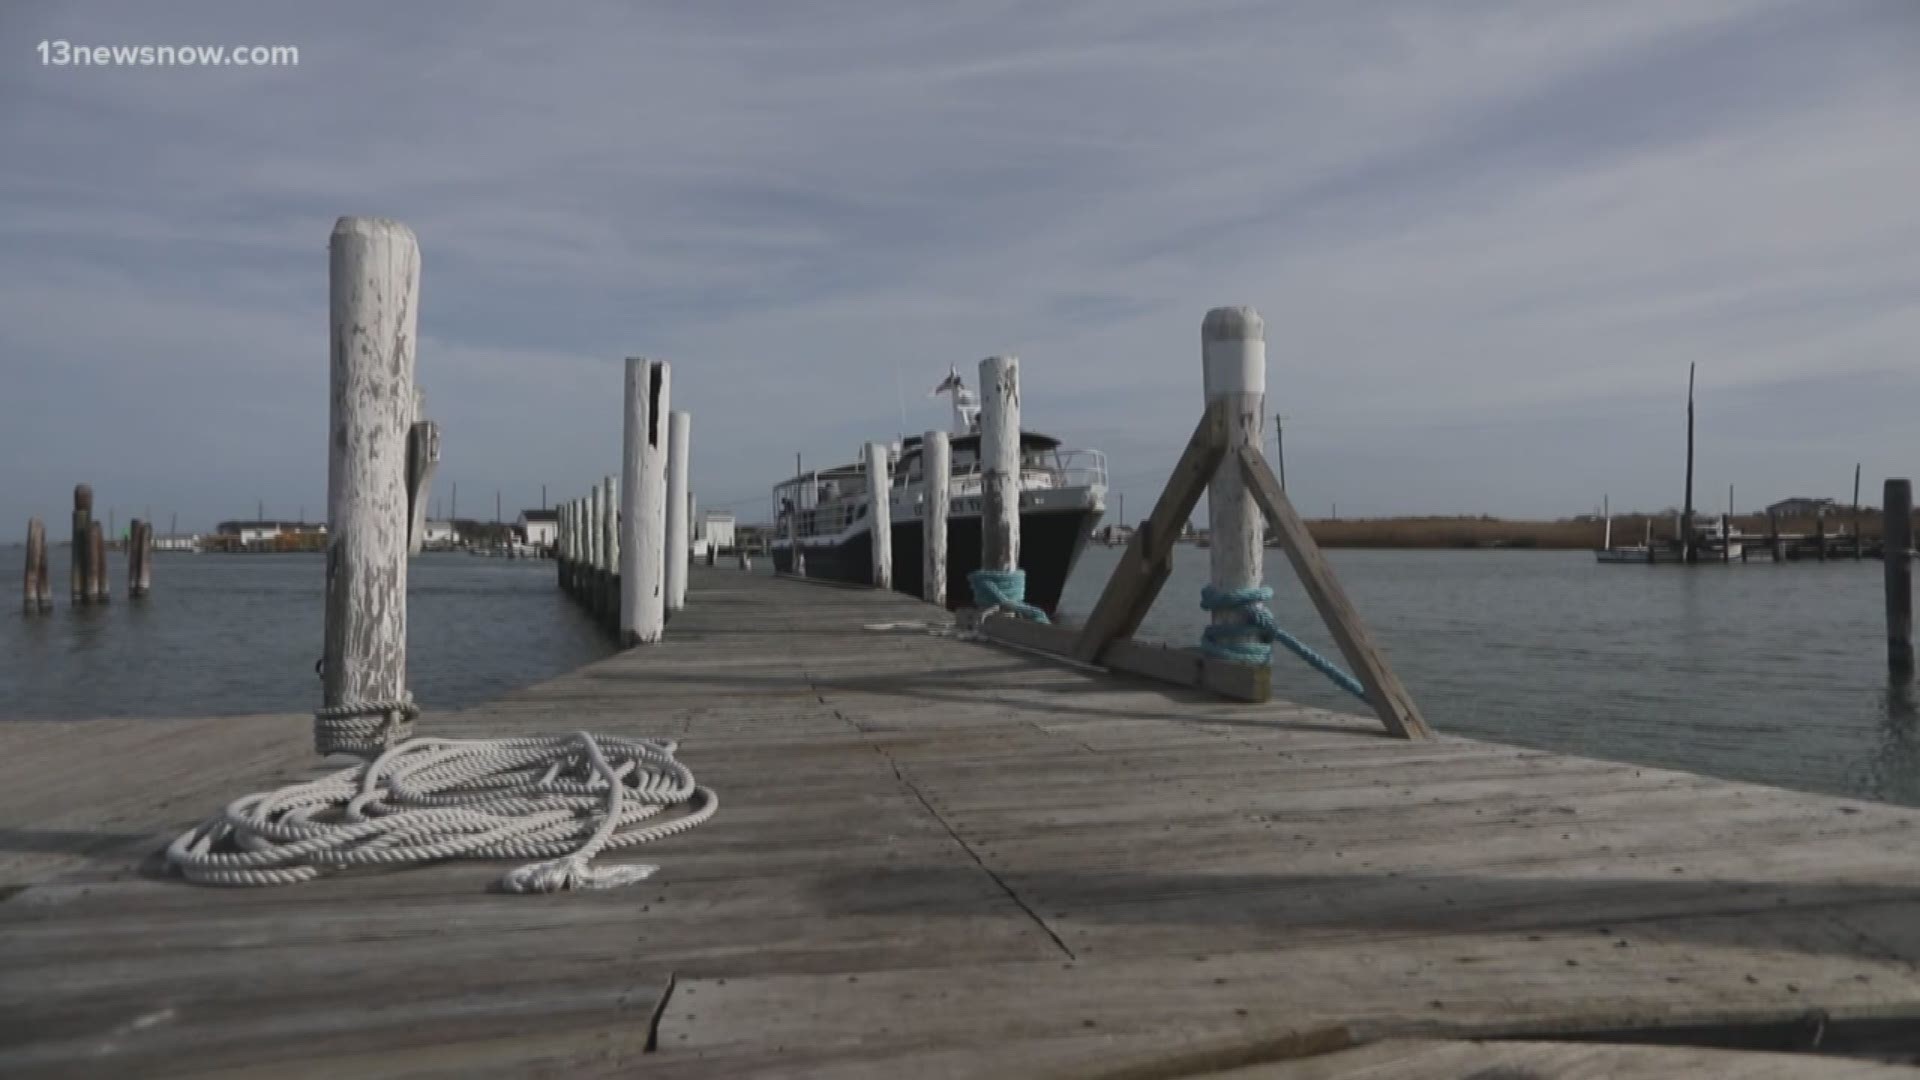 13News Now photojournalist Stephen Wozny shows how neighbors on a secluded island off the coast of the Eastern Shore are holding up amidst the coronavirus pandemic.